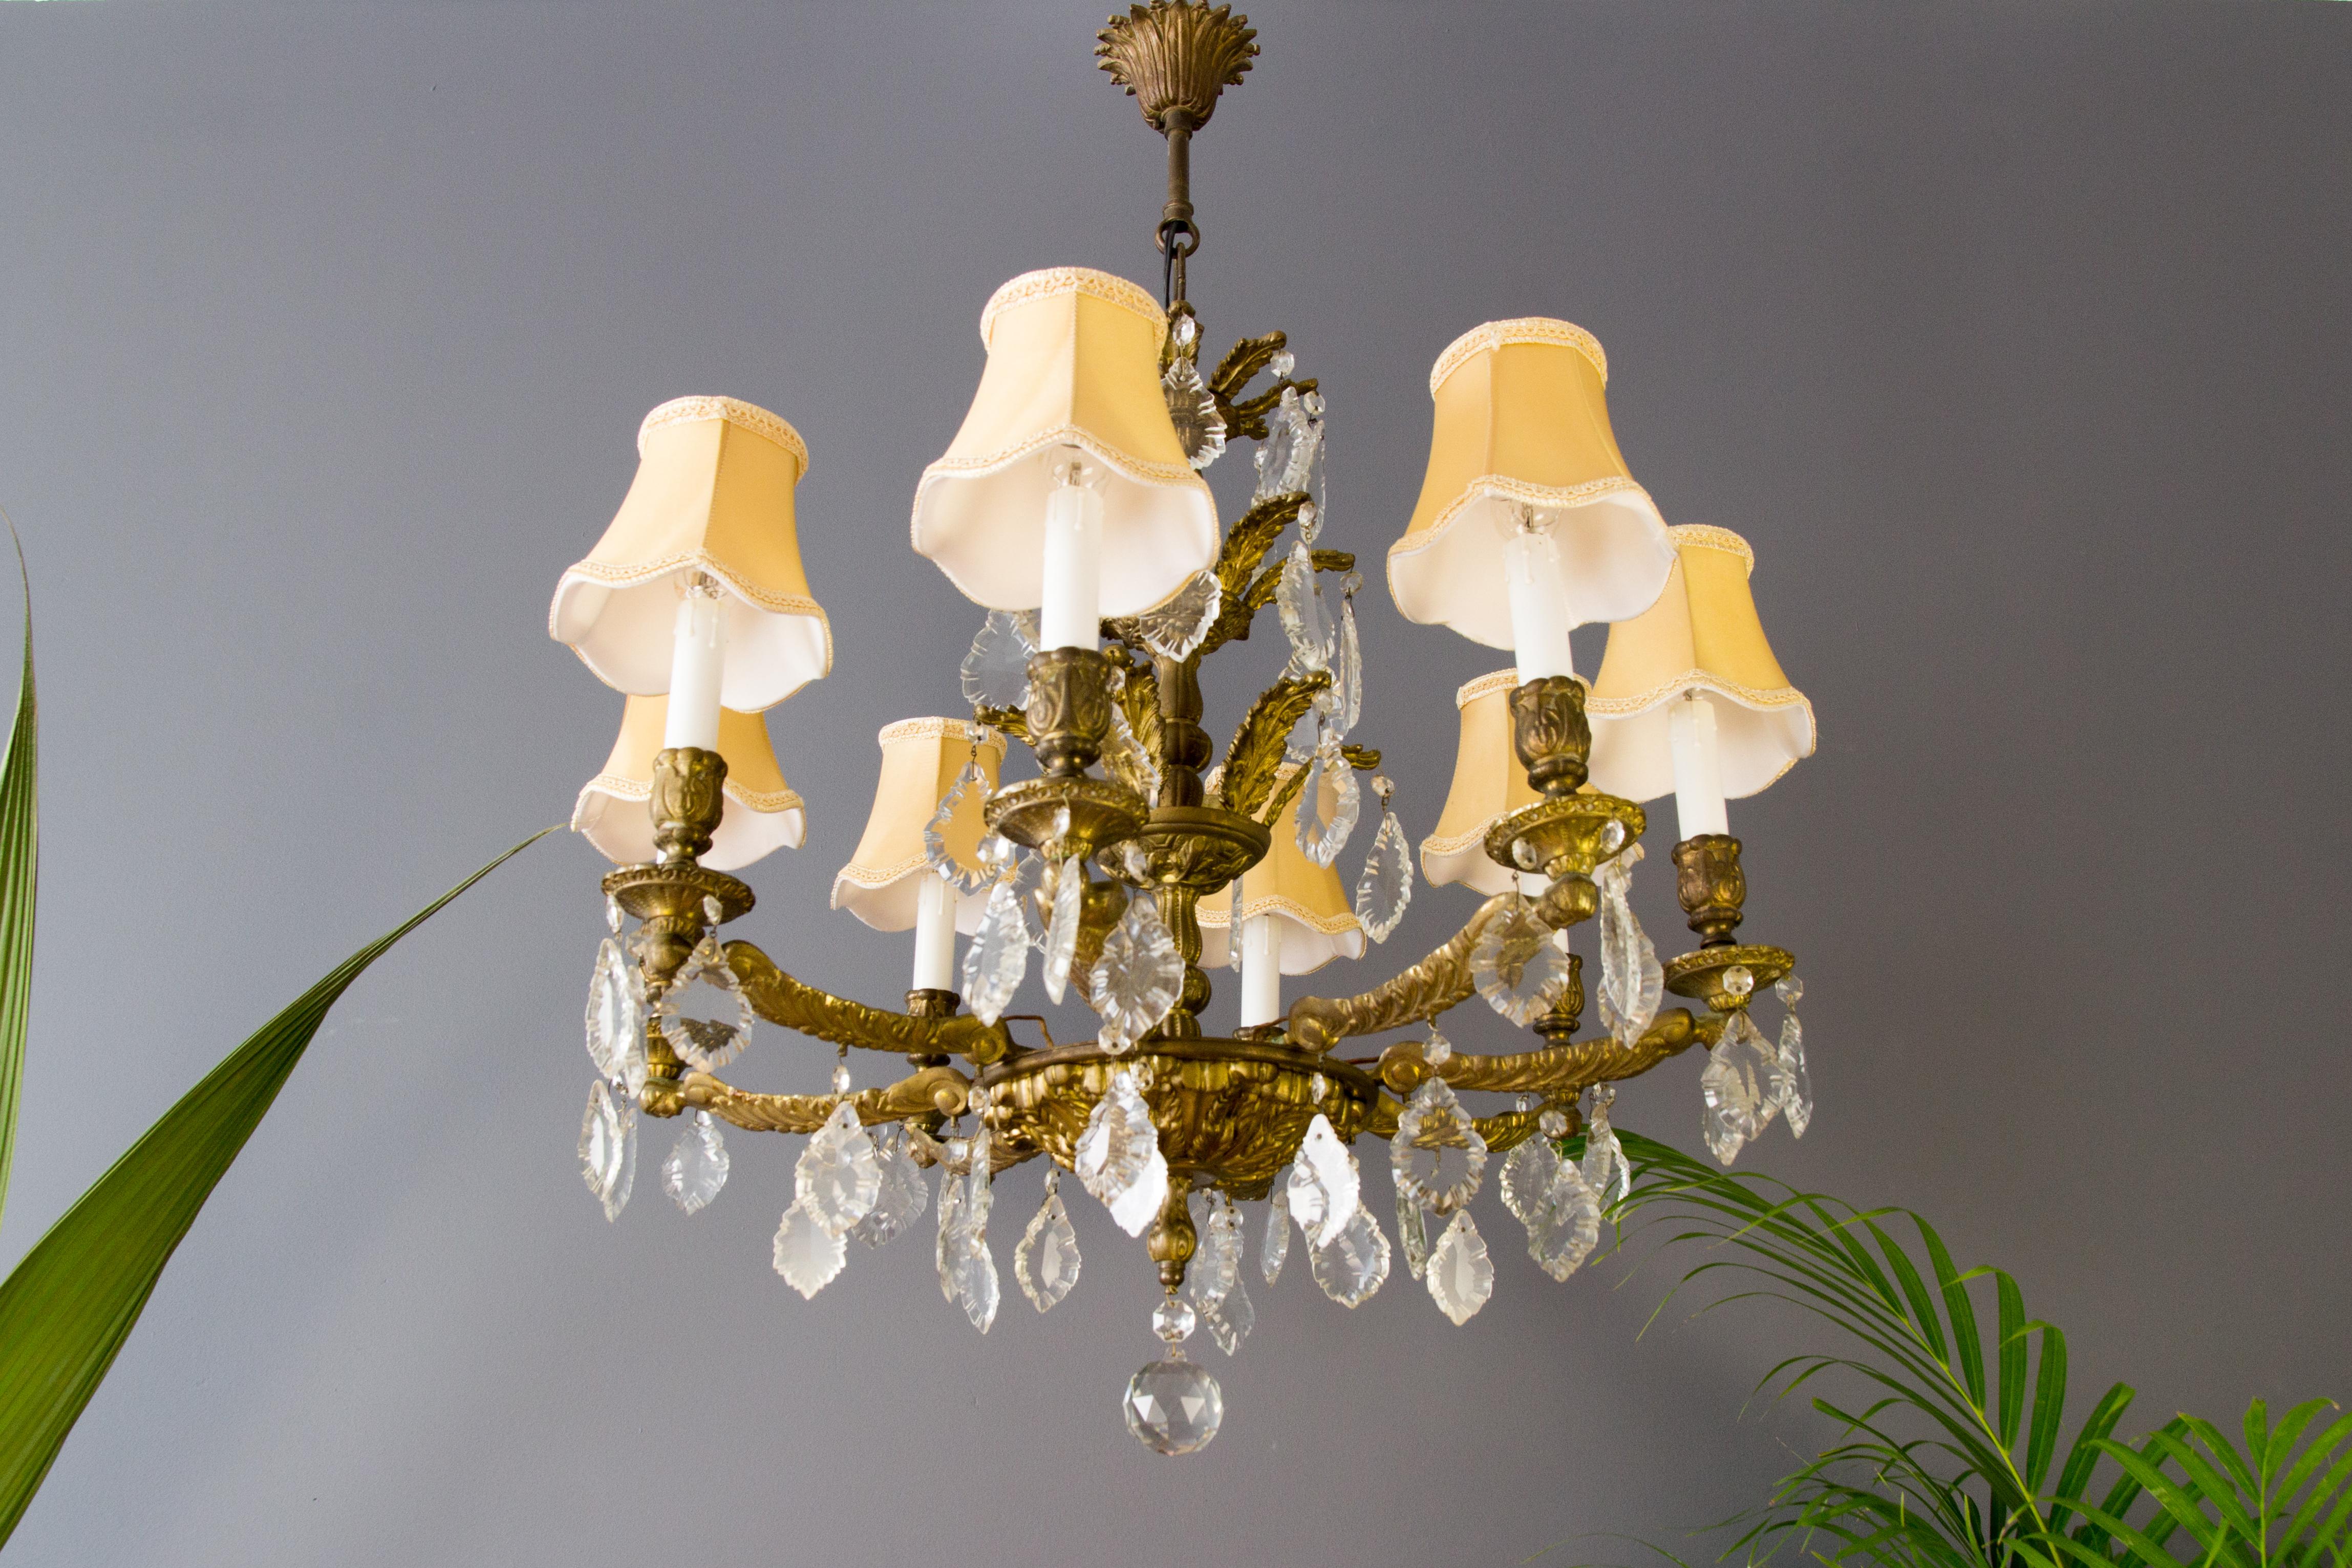 French bronze and crystal eight-light chandelier with new fabric lamp shades. Eight bronze arms with sockets for the E14 bulb, decorated with multifaceted and shaped crystal drops and a central crystal glass ball.
Measures: Height is 33.07 inches /